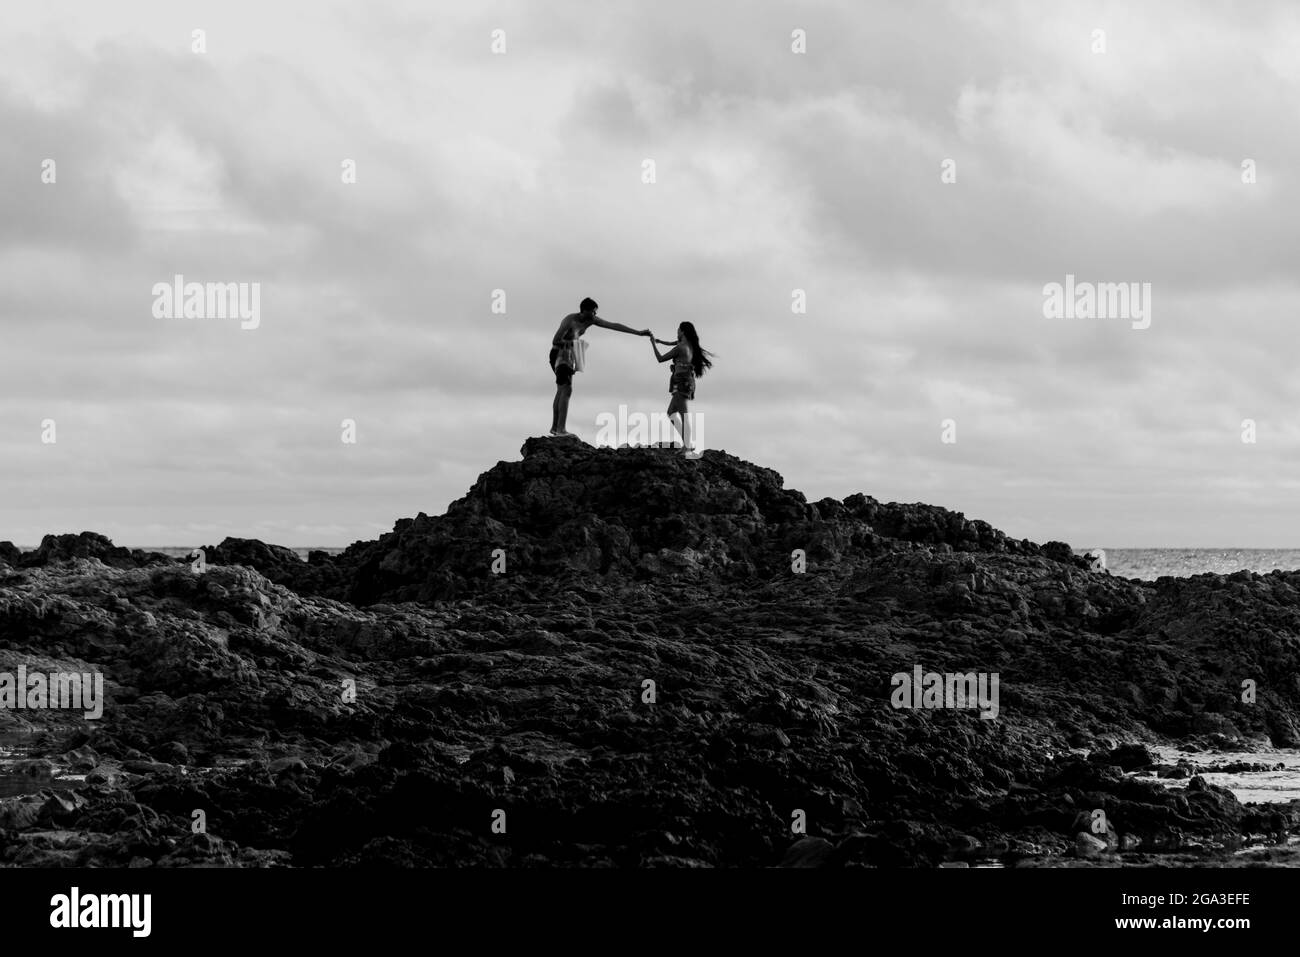 silhouette of two people on a very large rock. Ondina Beach in Salvador, Bahia, Brazil. Stock Photo